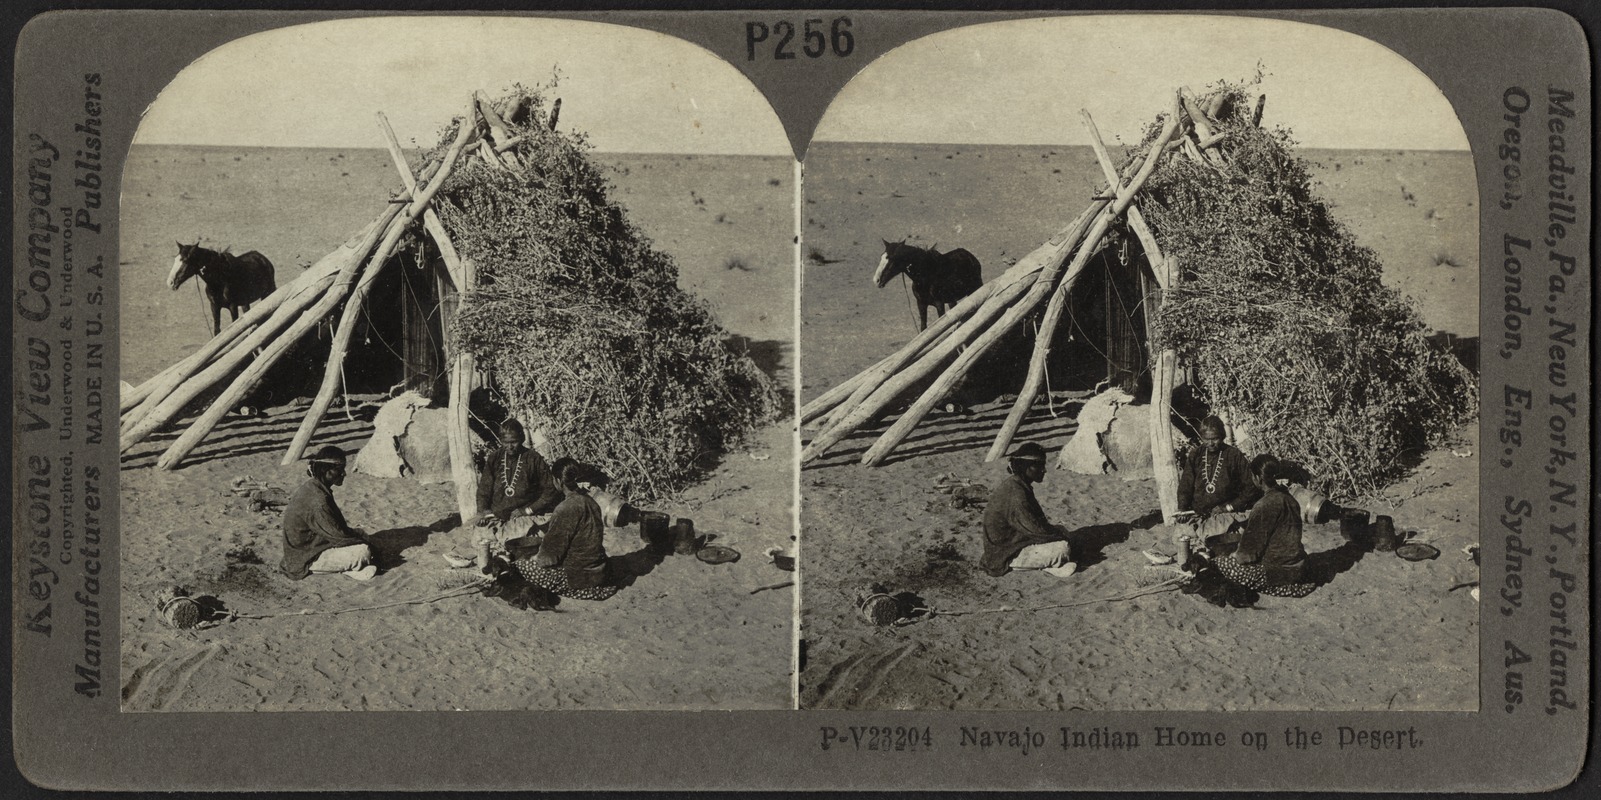 Navajo Indian home on the desert